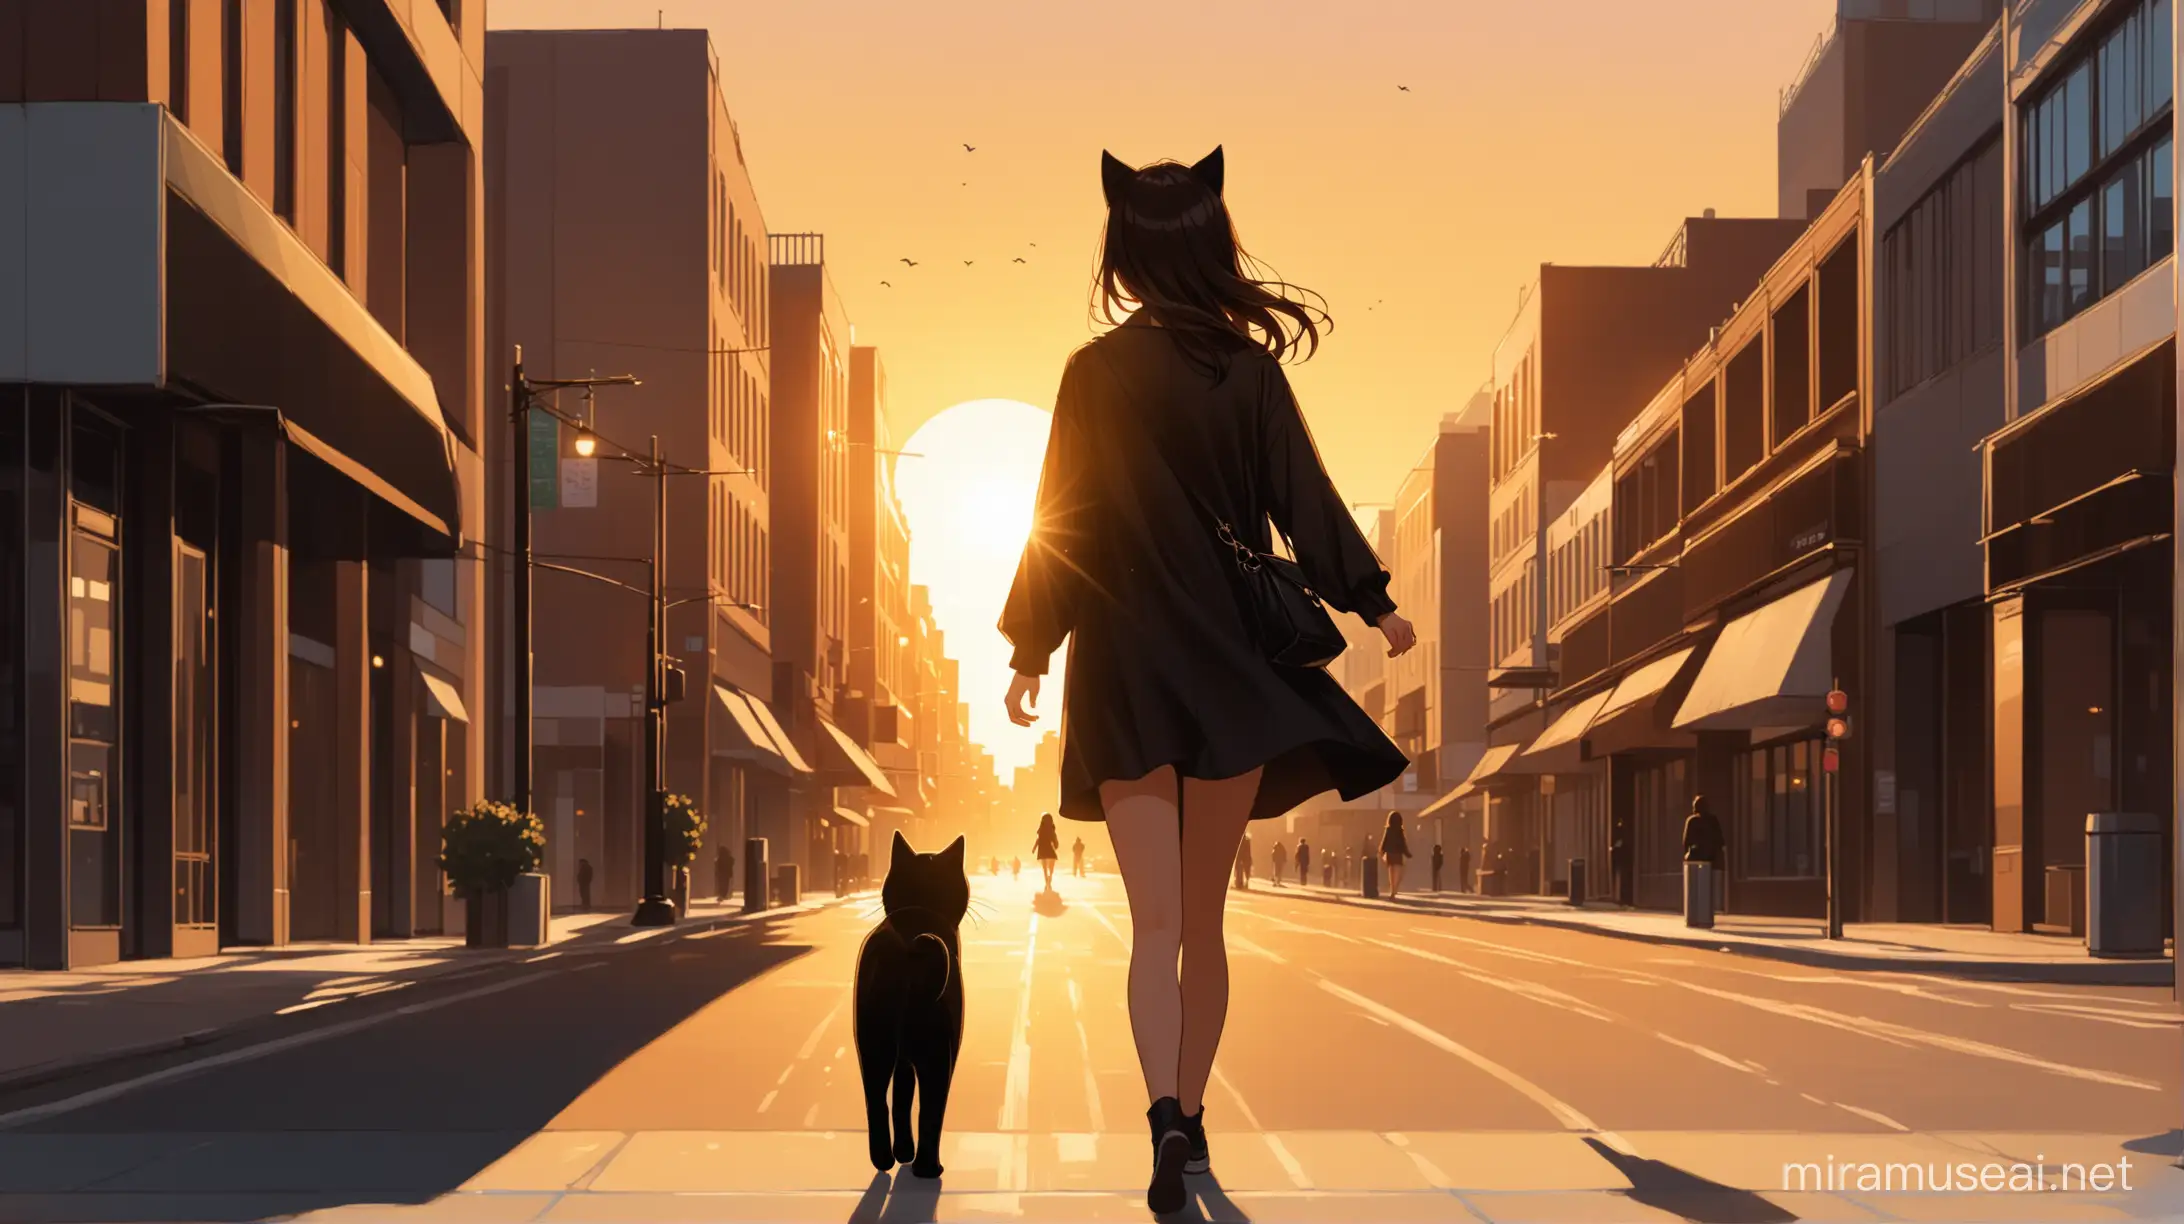 Golden Hour Stroll Girl Walking with Black Cat in Urban Setting